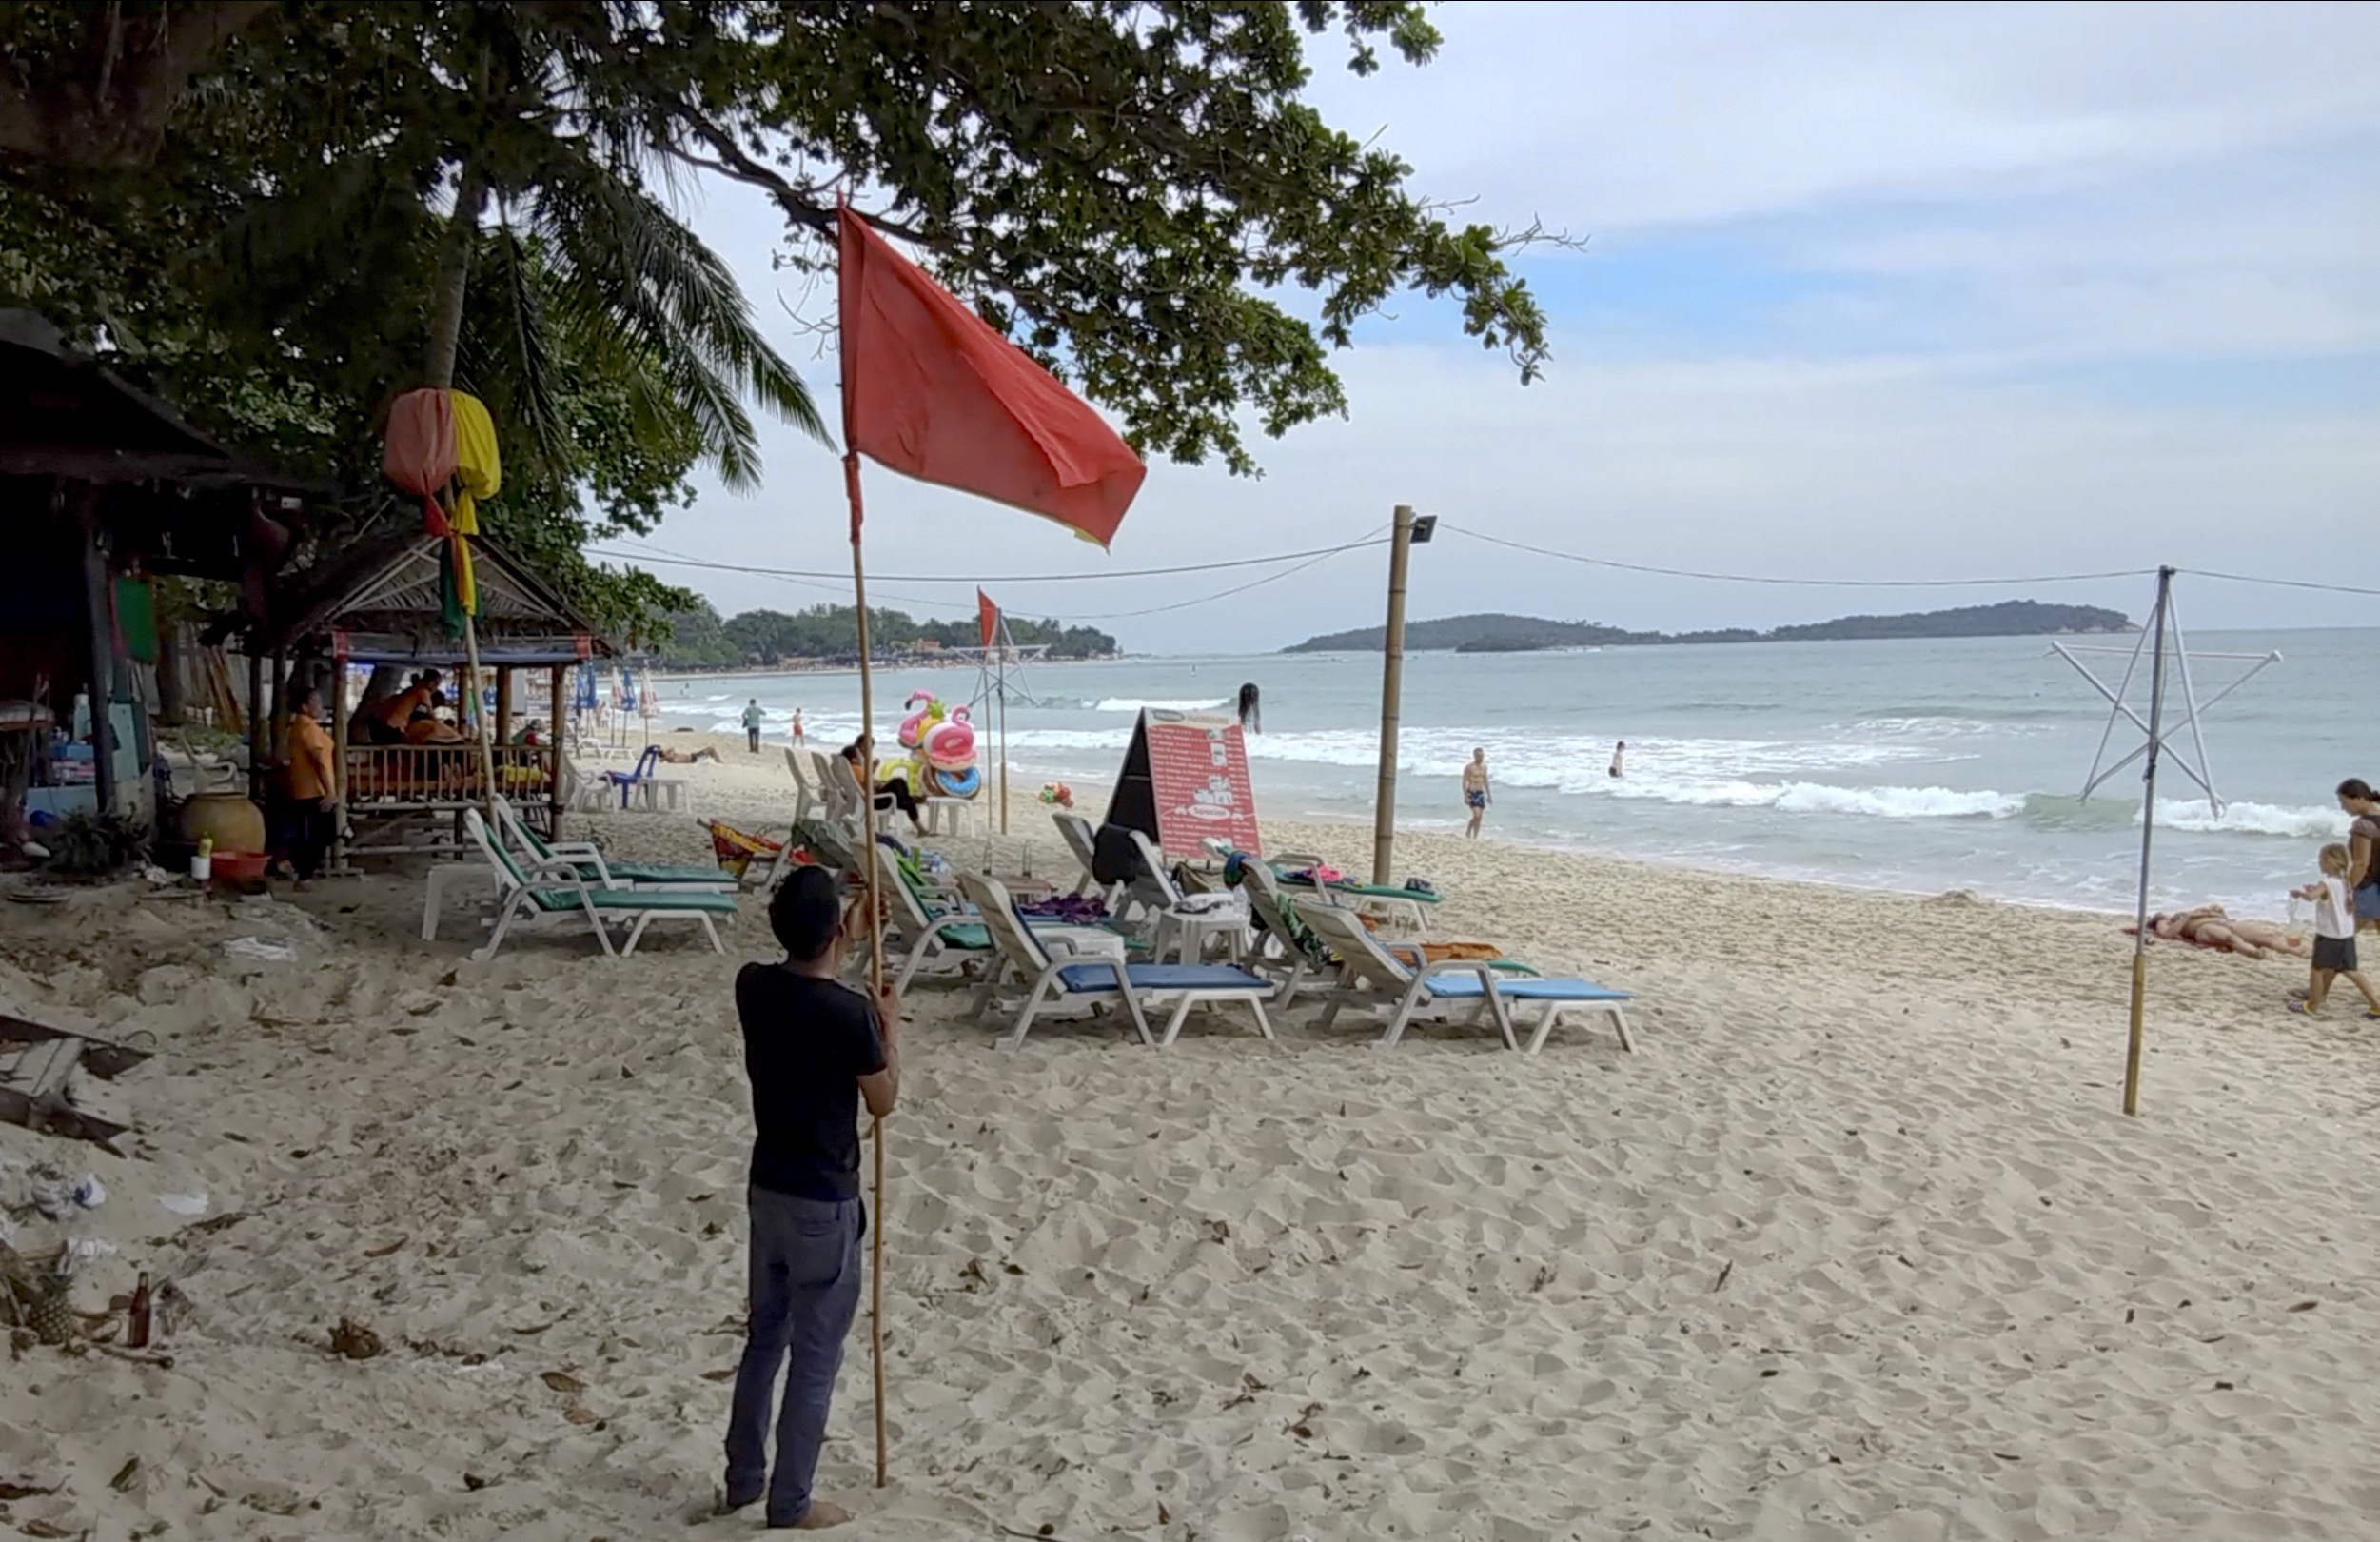 A man raises a red flag indicating rough weather conditions in Chaweng beach, Koh Samui, Thailand, Thursday, Jan. 3. (AP Photo/Sithipong Charoenjai)